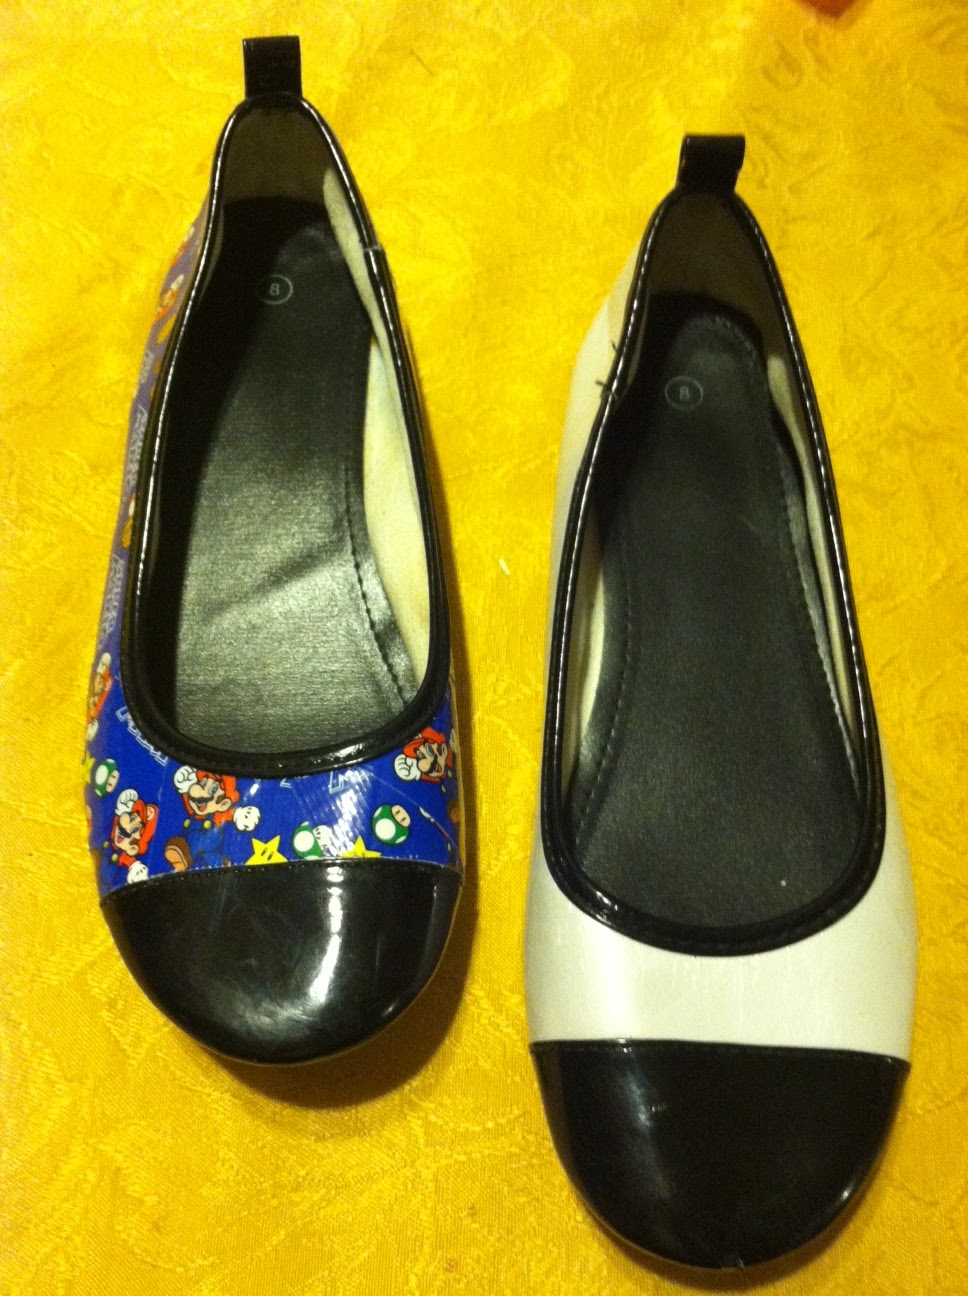 Candy, Cake, and Crafts: Super Mario Duct Tape Shoes - Recycle Project